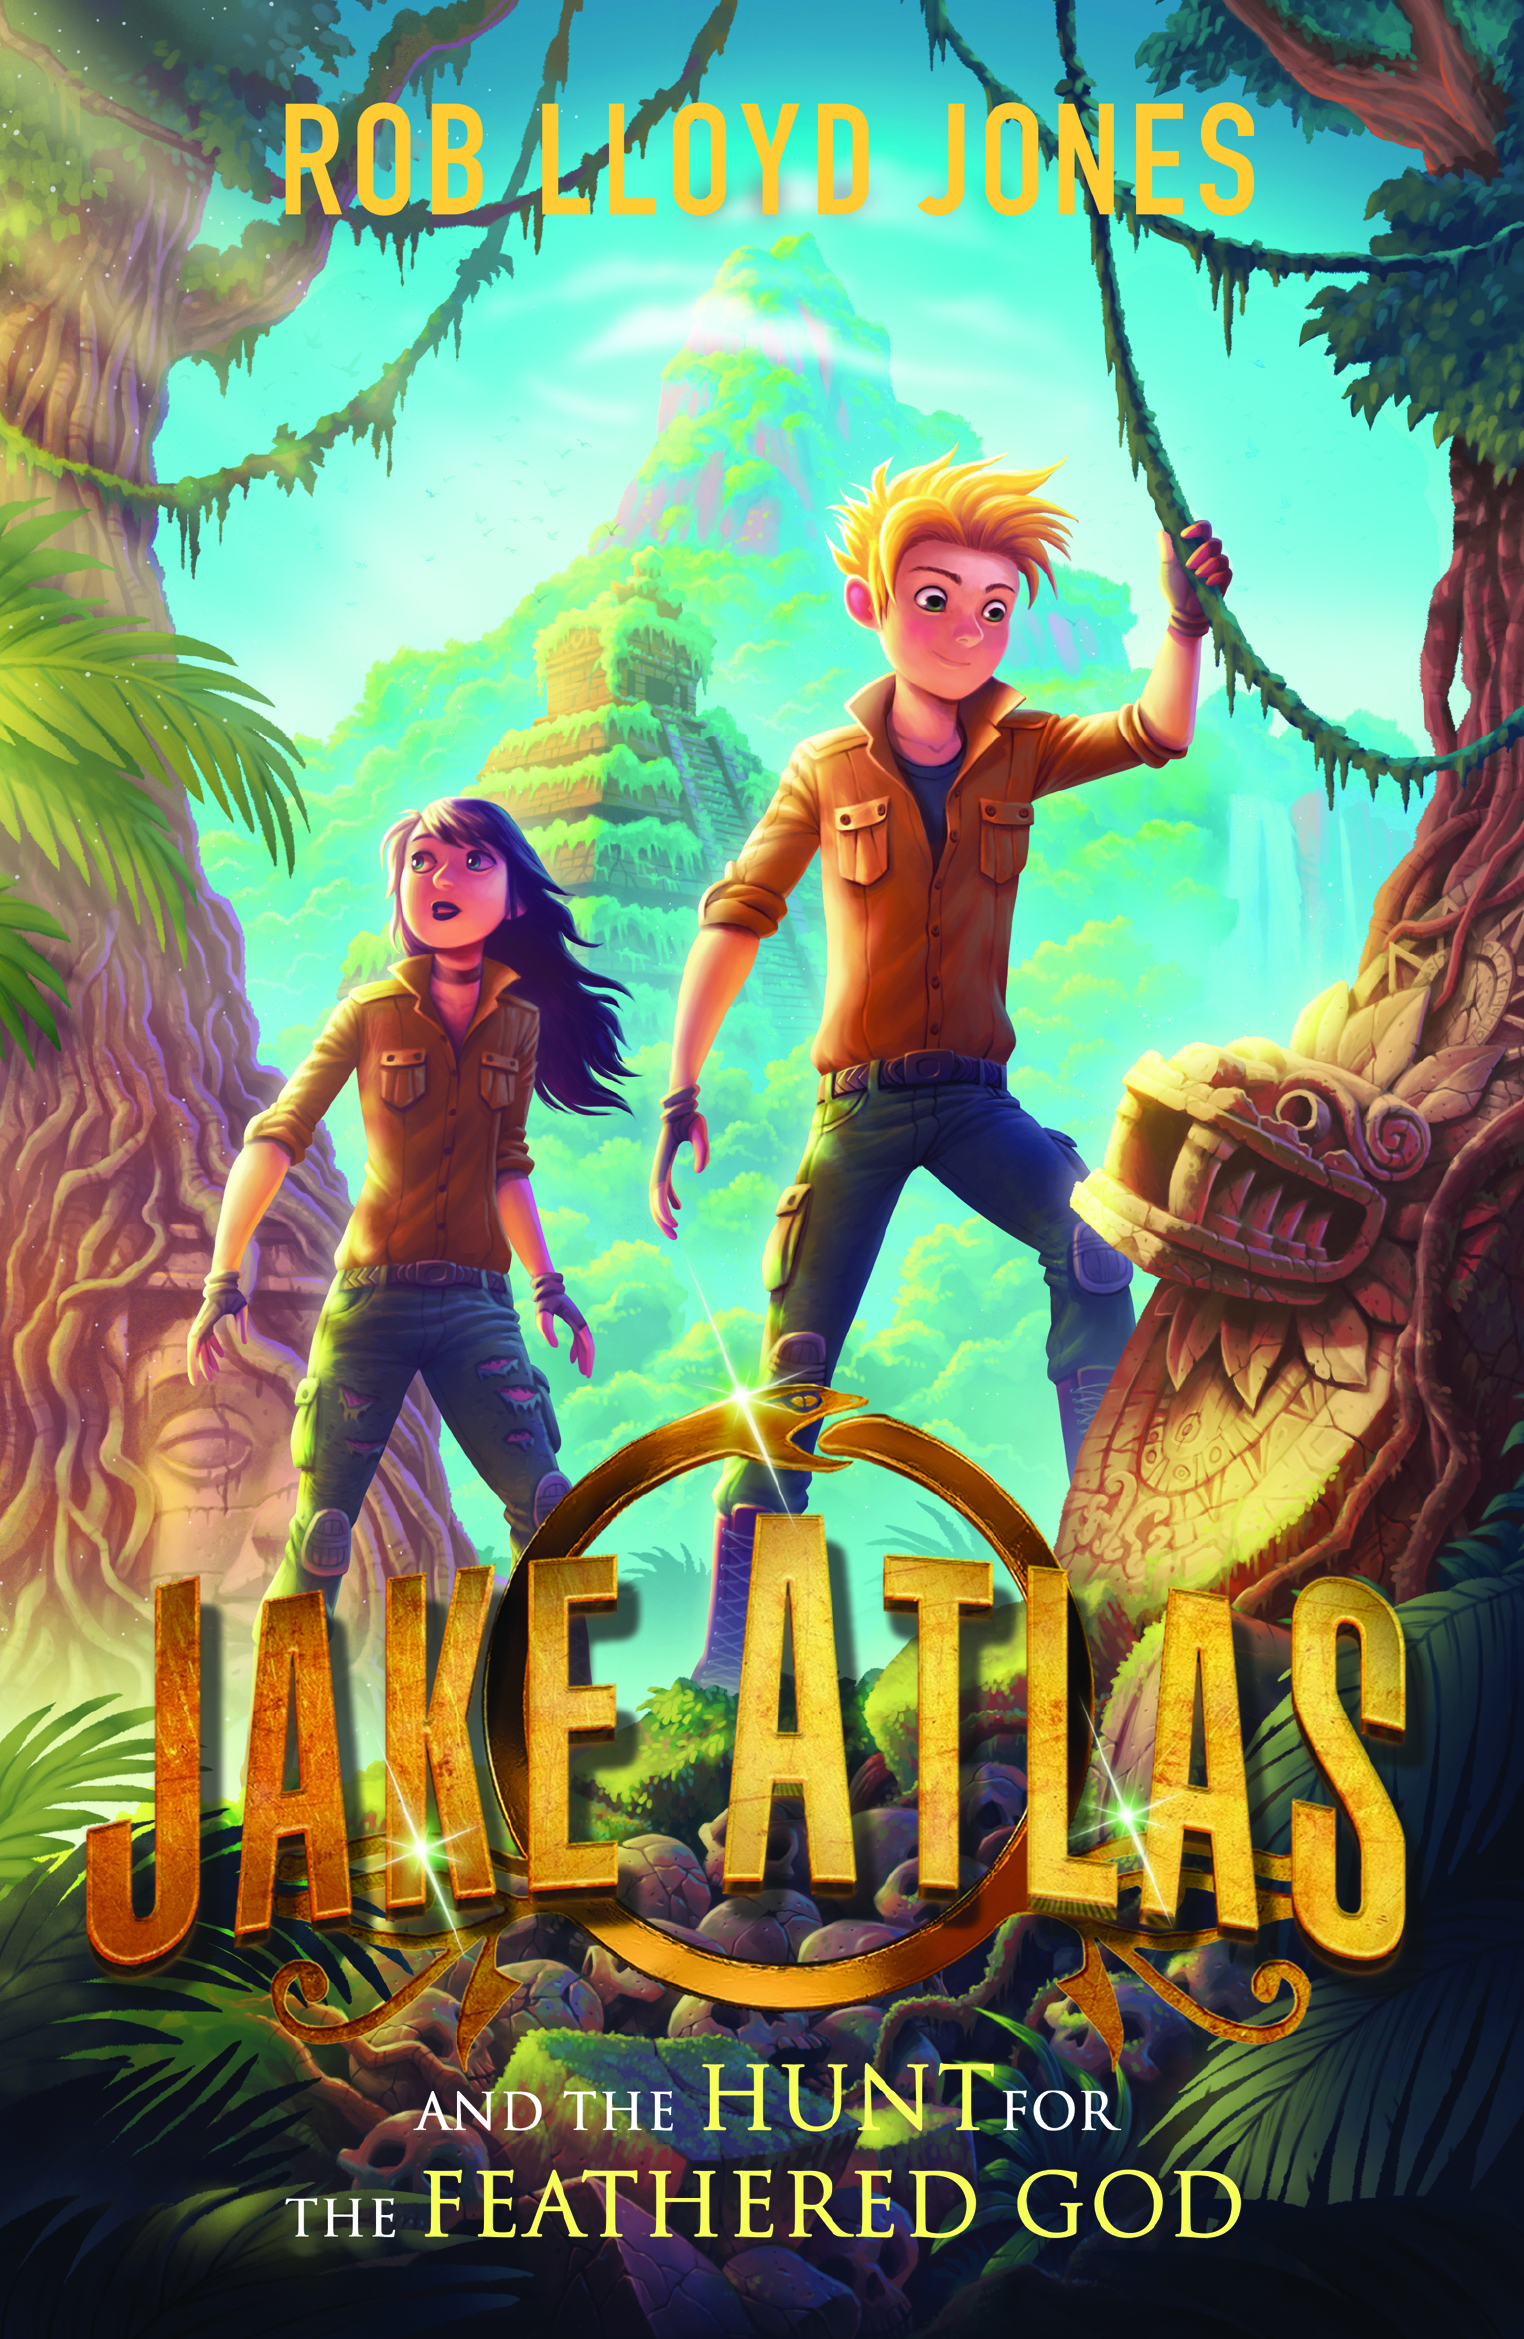 Jake-Atlas-and-the-Hunt-for-the-Feathered-God